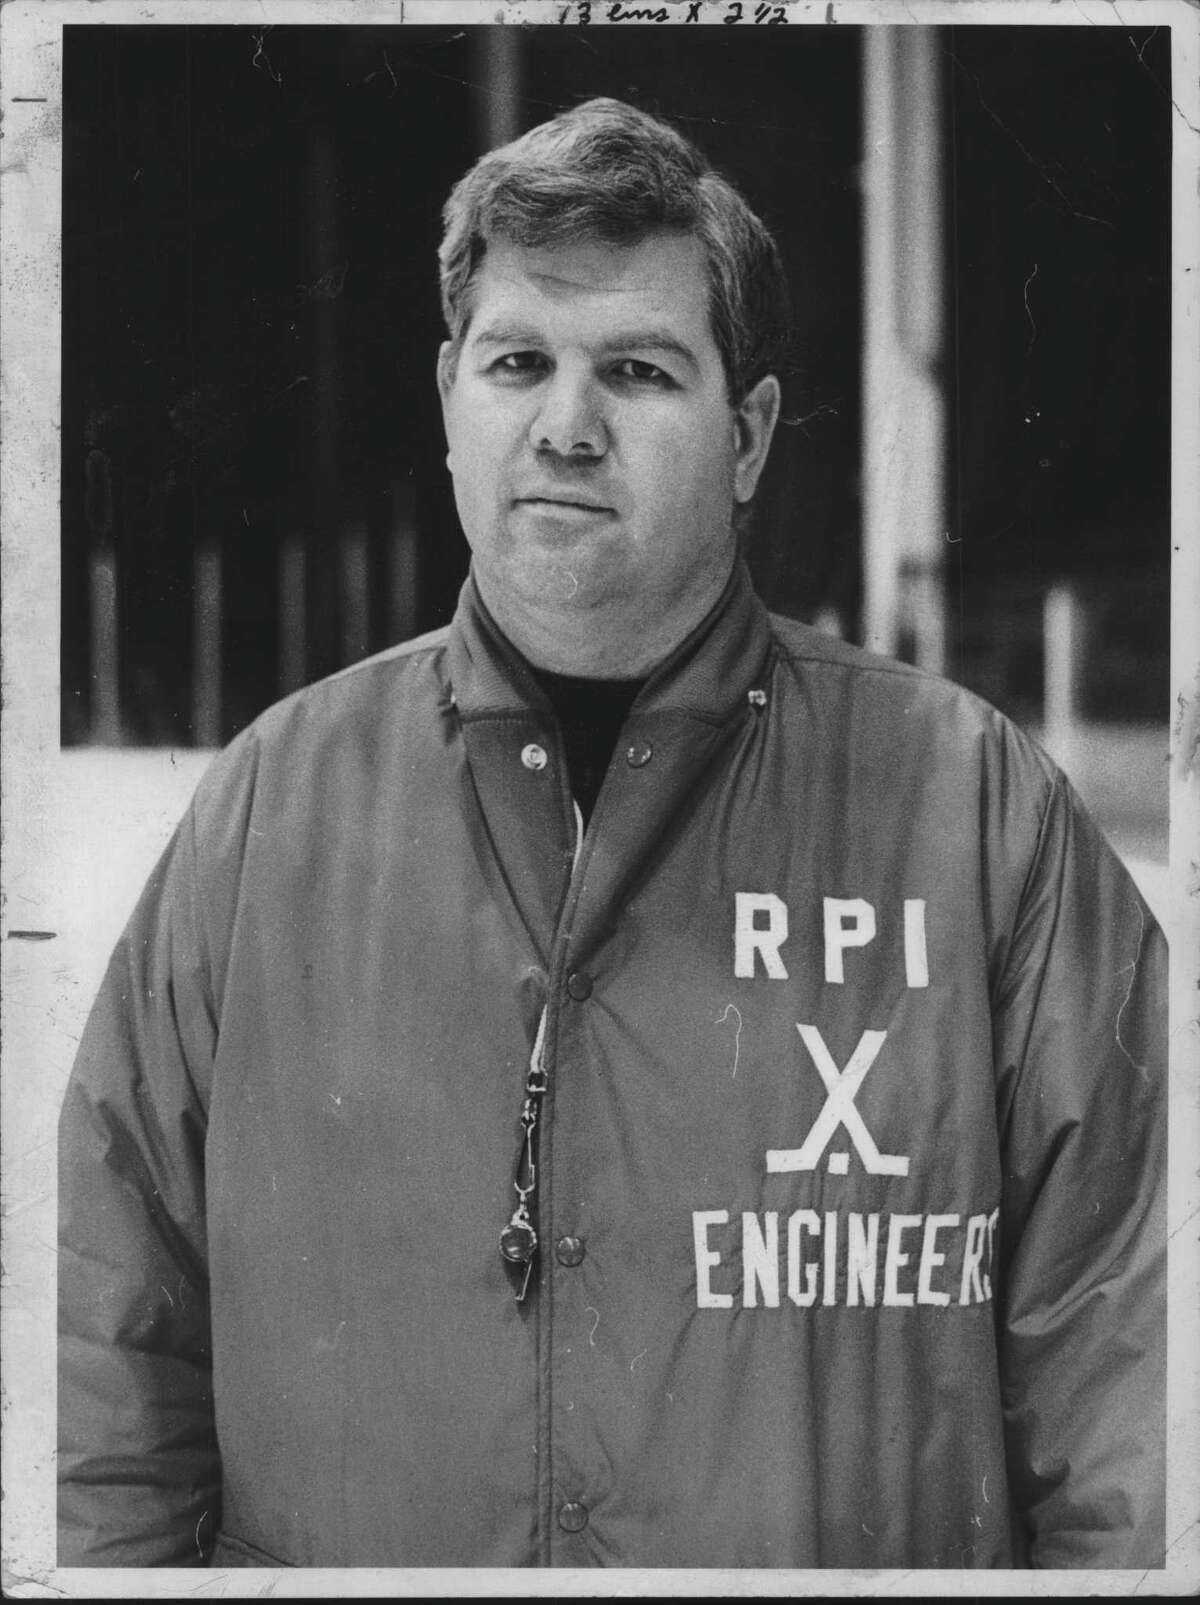 Mike Addesa, shown in an undated photo, led the RPI men's hockey team to a 186-124-9 record from 1979 to 1989, including the 1985 national championship. He died Tuesday at age 77.